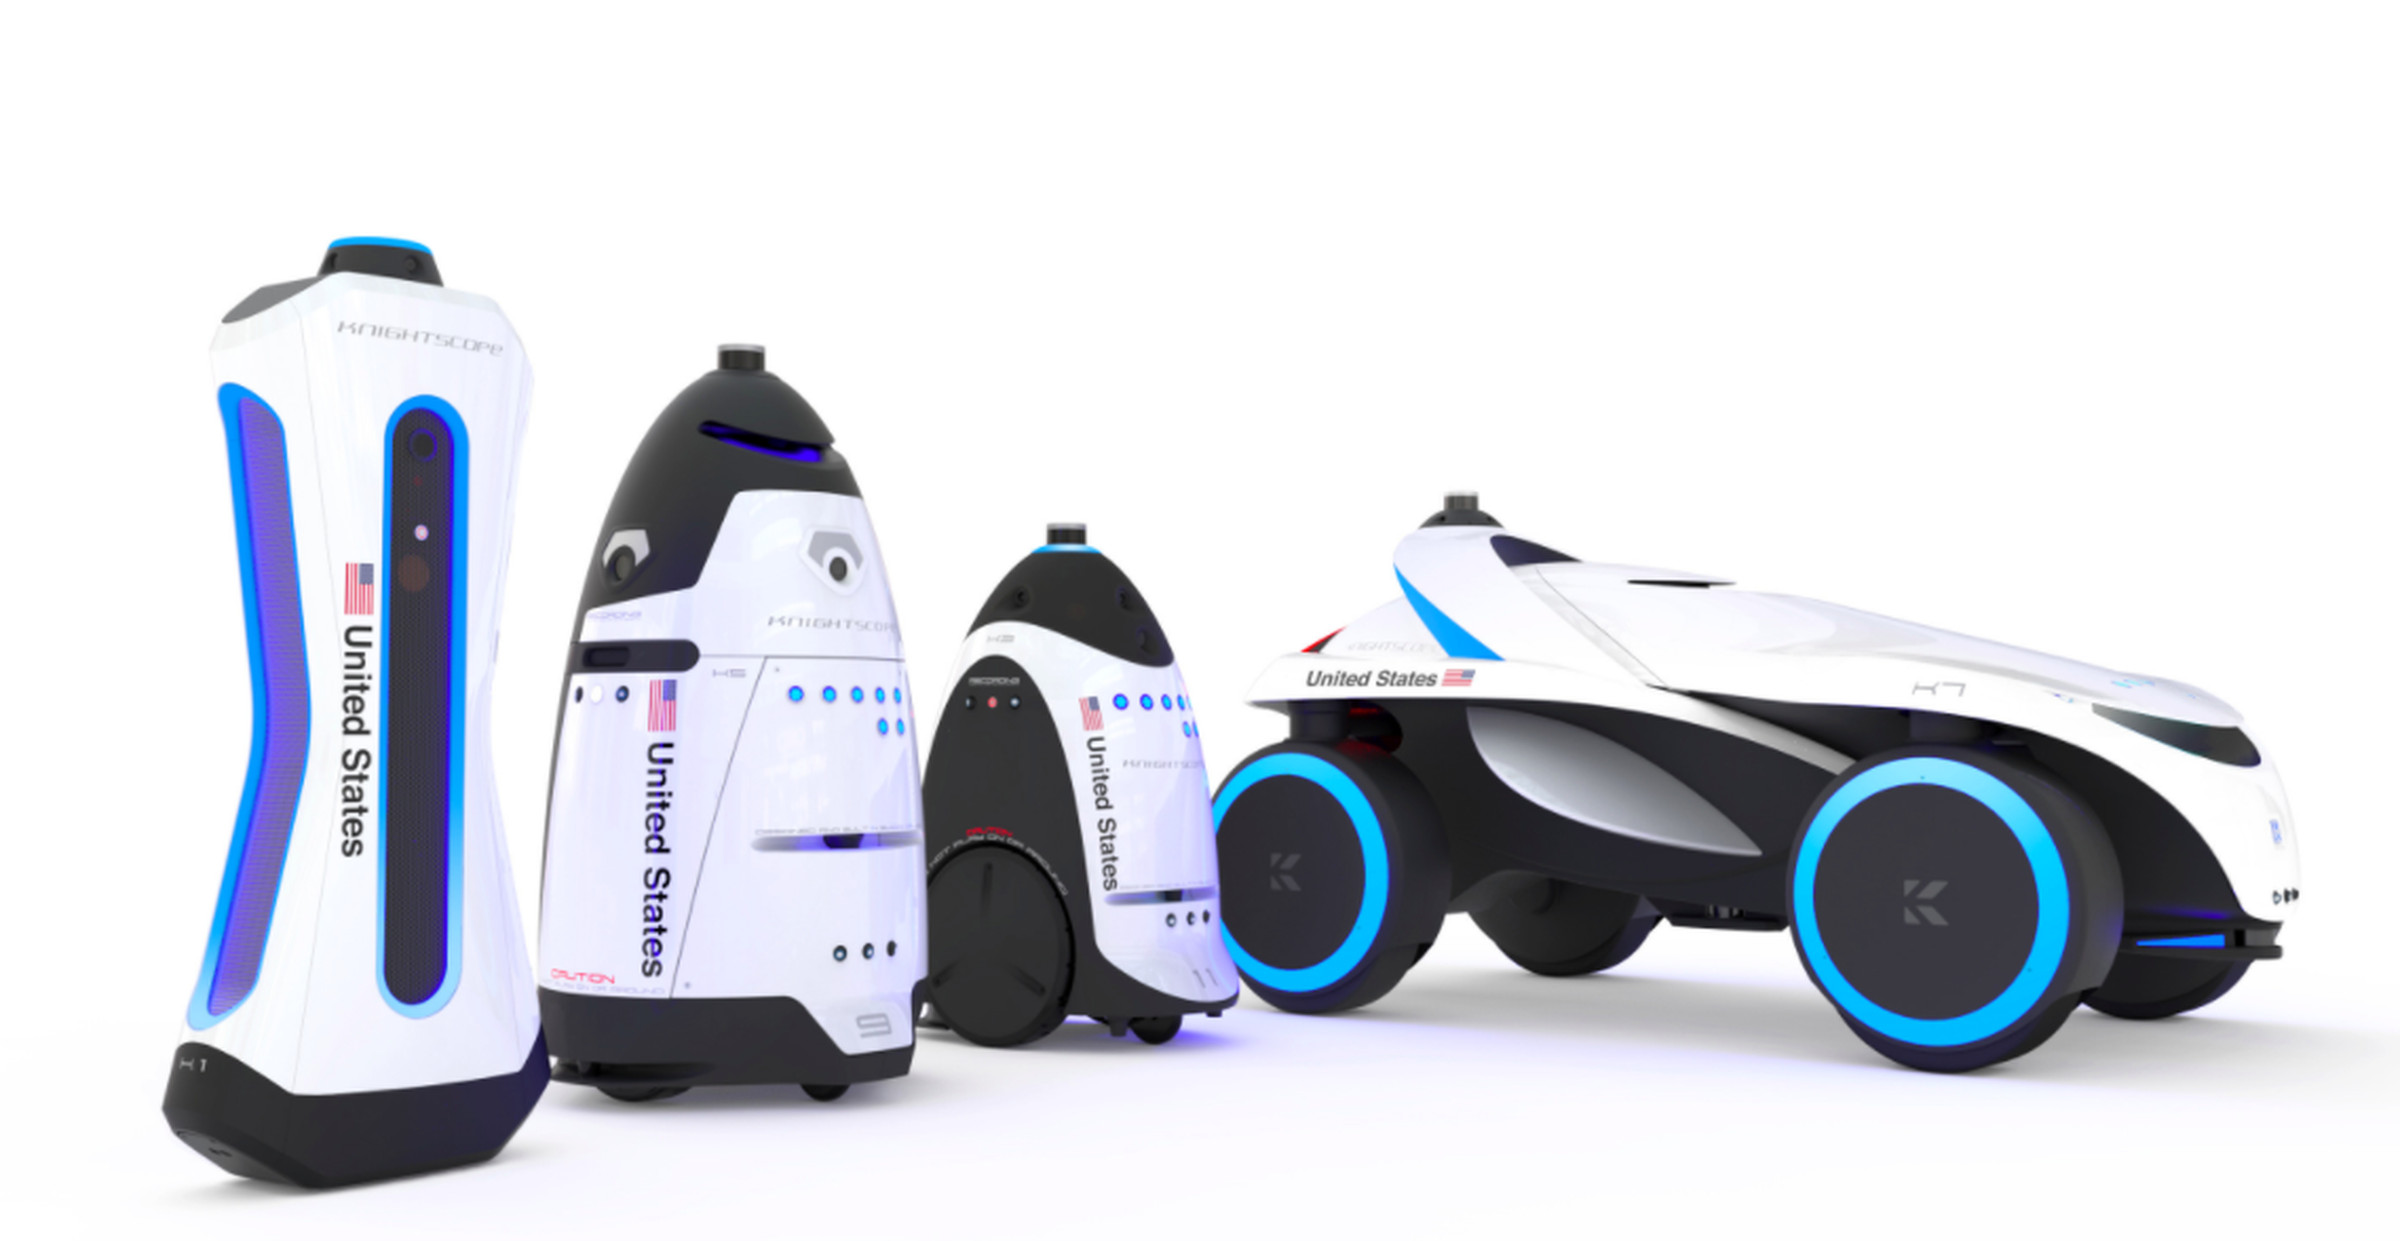 Knightscope’s full line-up. From left to right: the K1 stationary weapon scanner; the K5 outdoor patrol bot; K3 indoor patrol bot; and K7 multi-terrain buggy. 